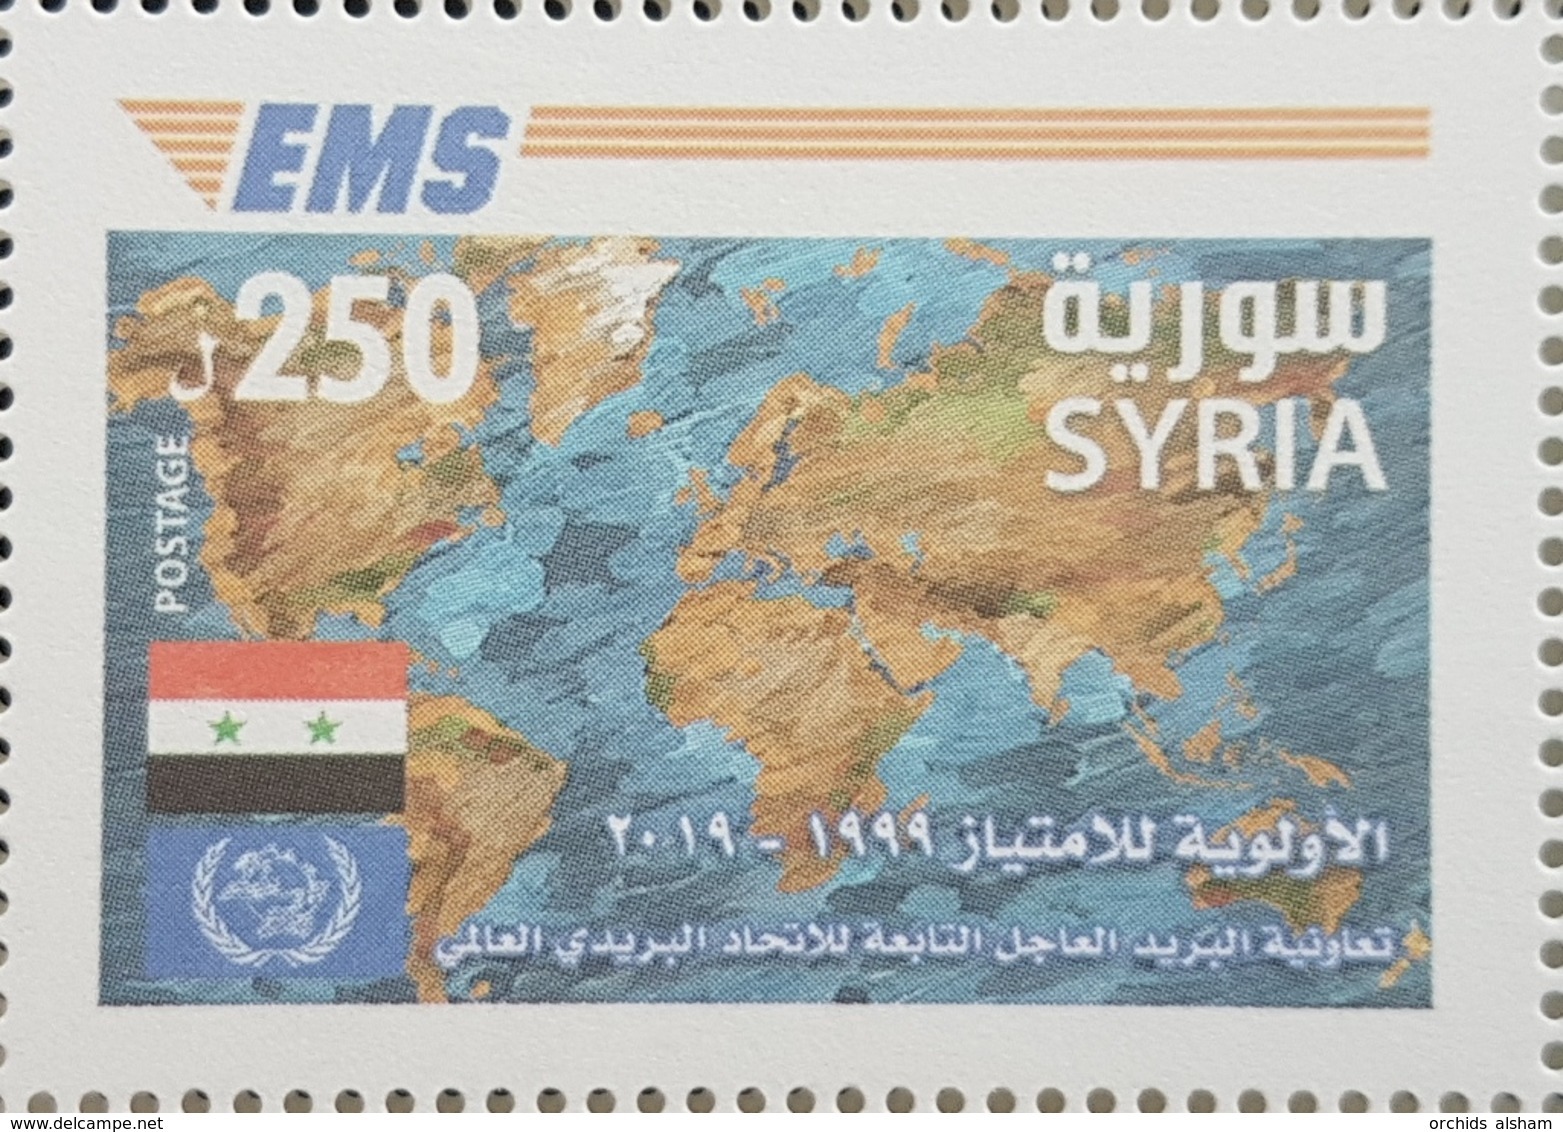 Syria New 2019 MNH Stamp - EMS - Express Mail Service - Worldwide Joint Issue - Syria